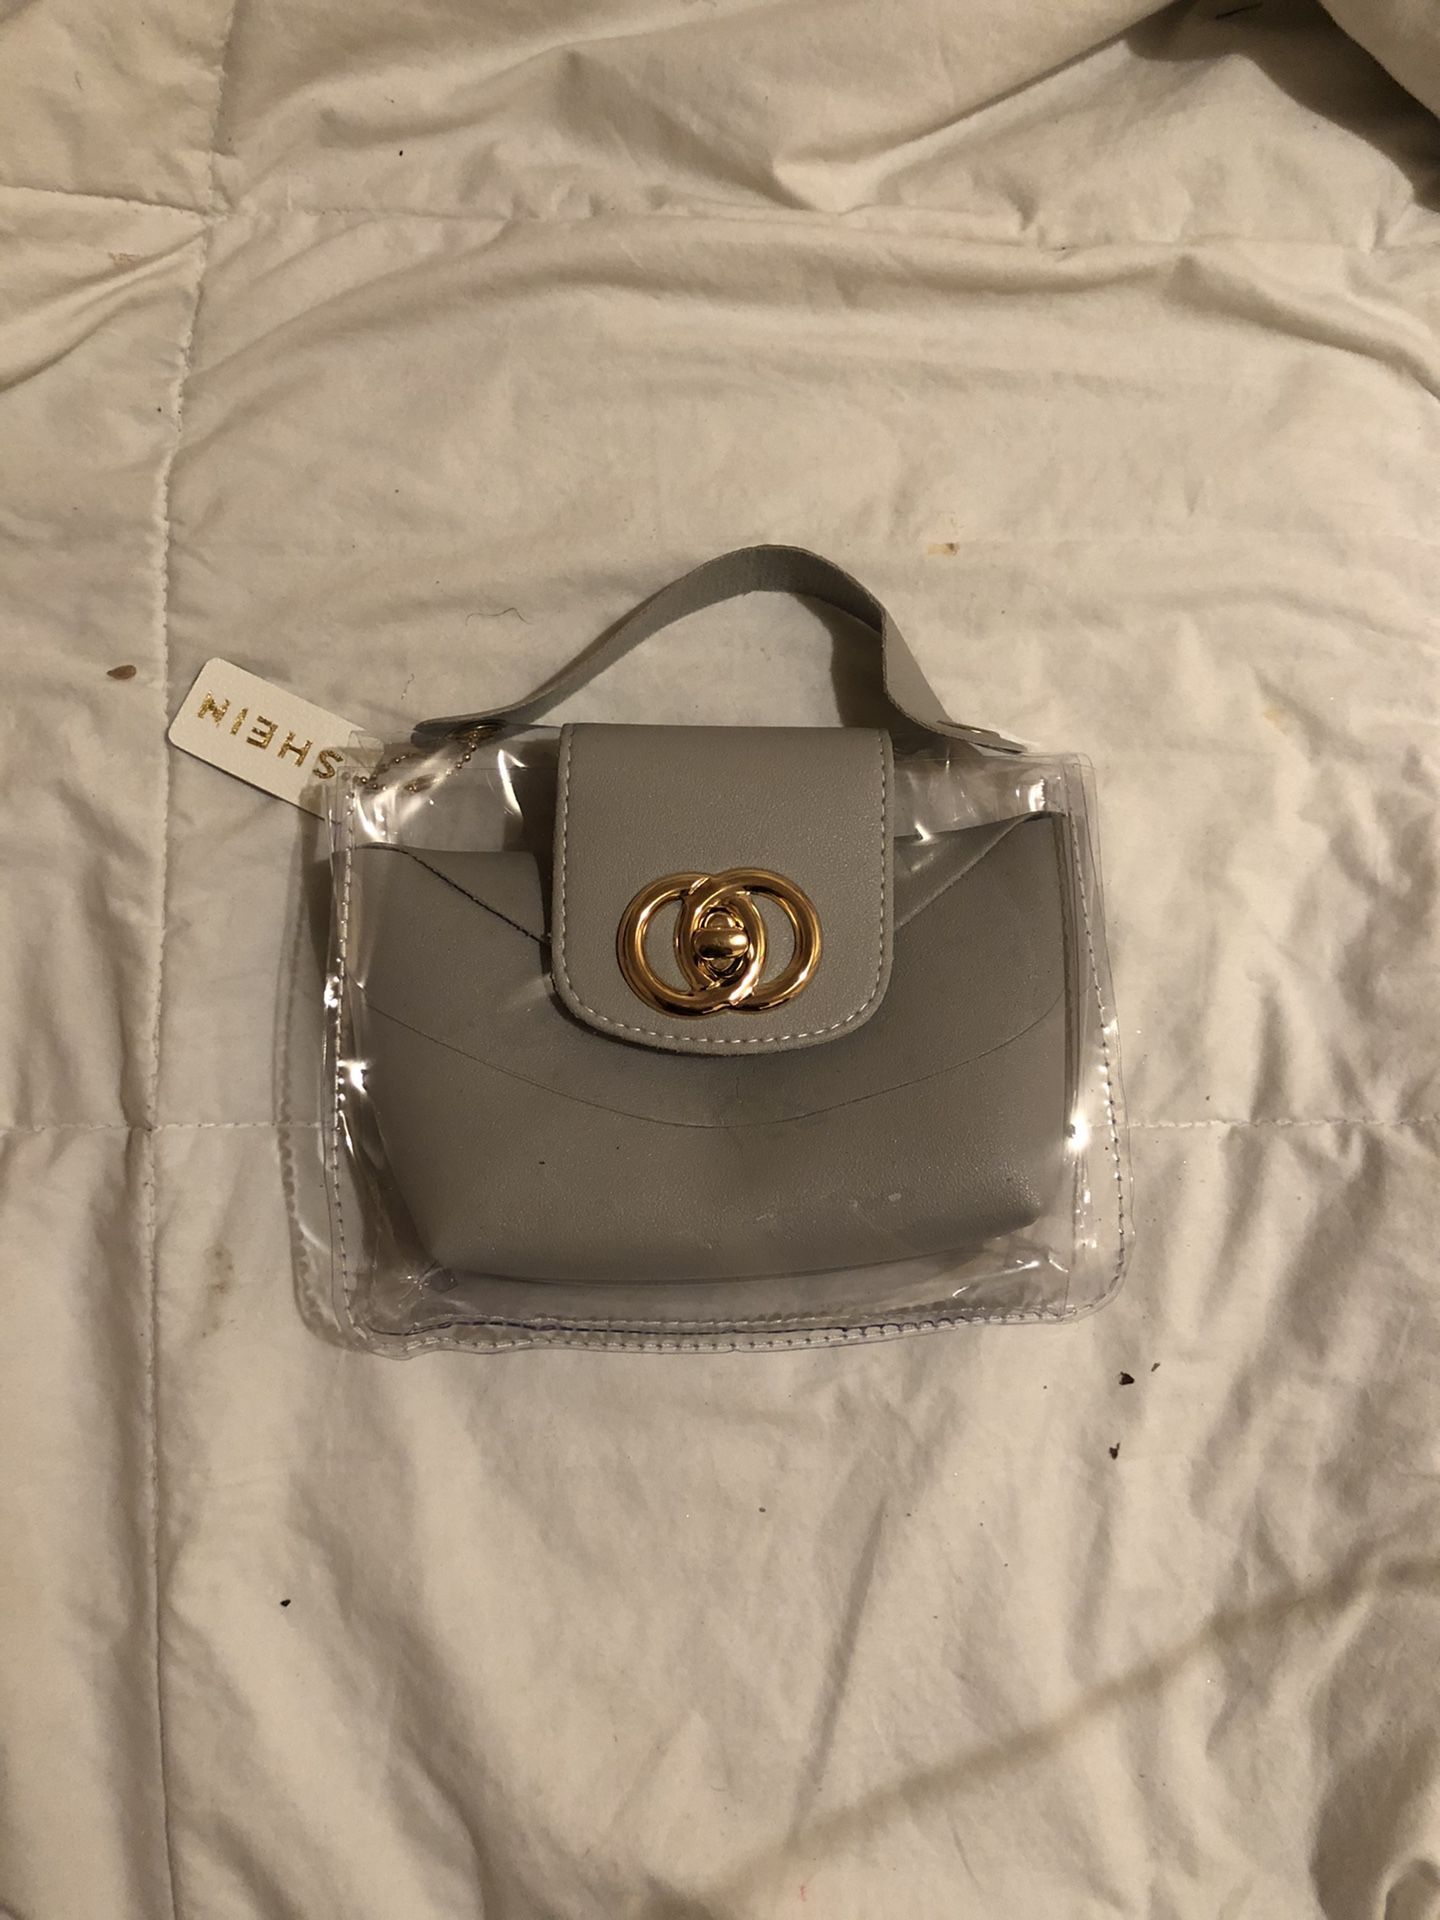 Clear/Grey removable wallet handle bag